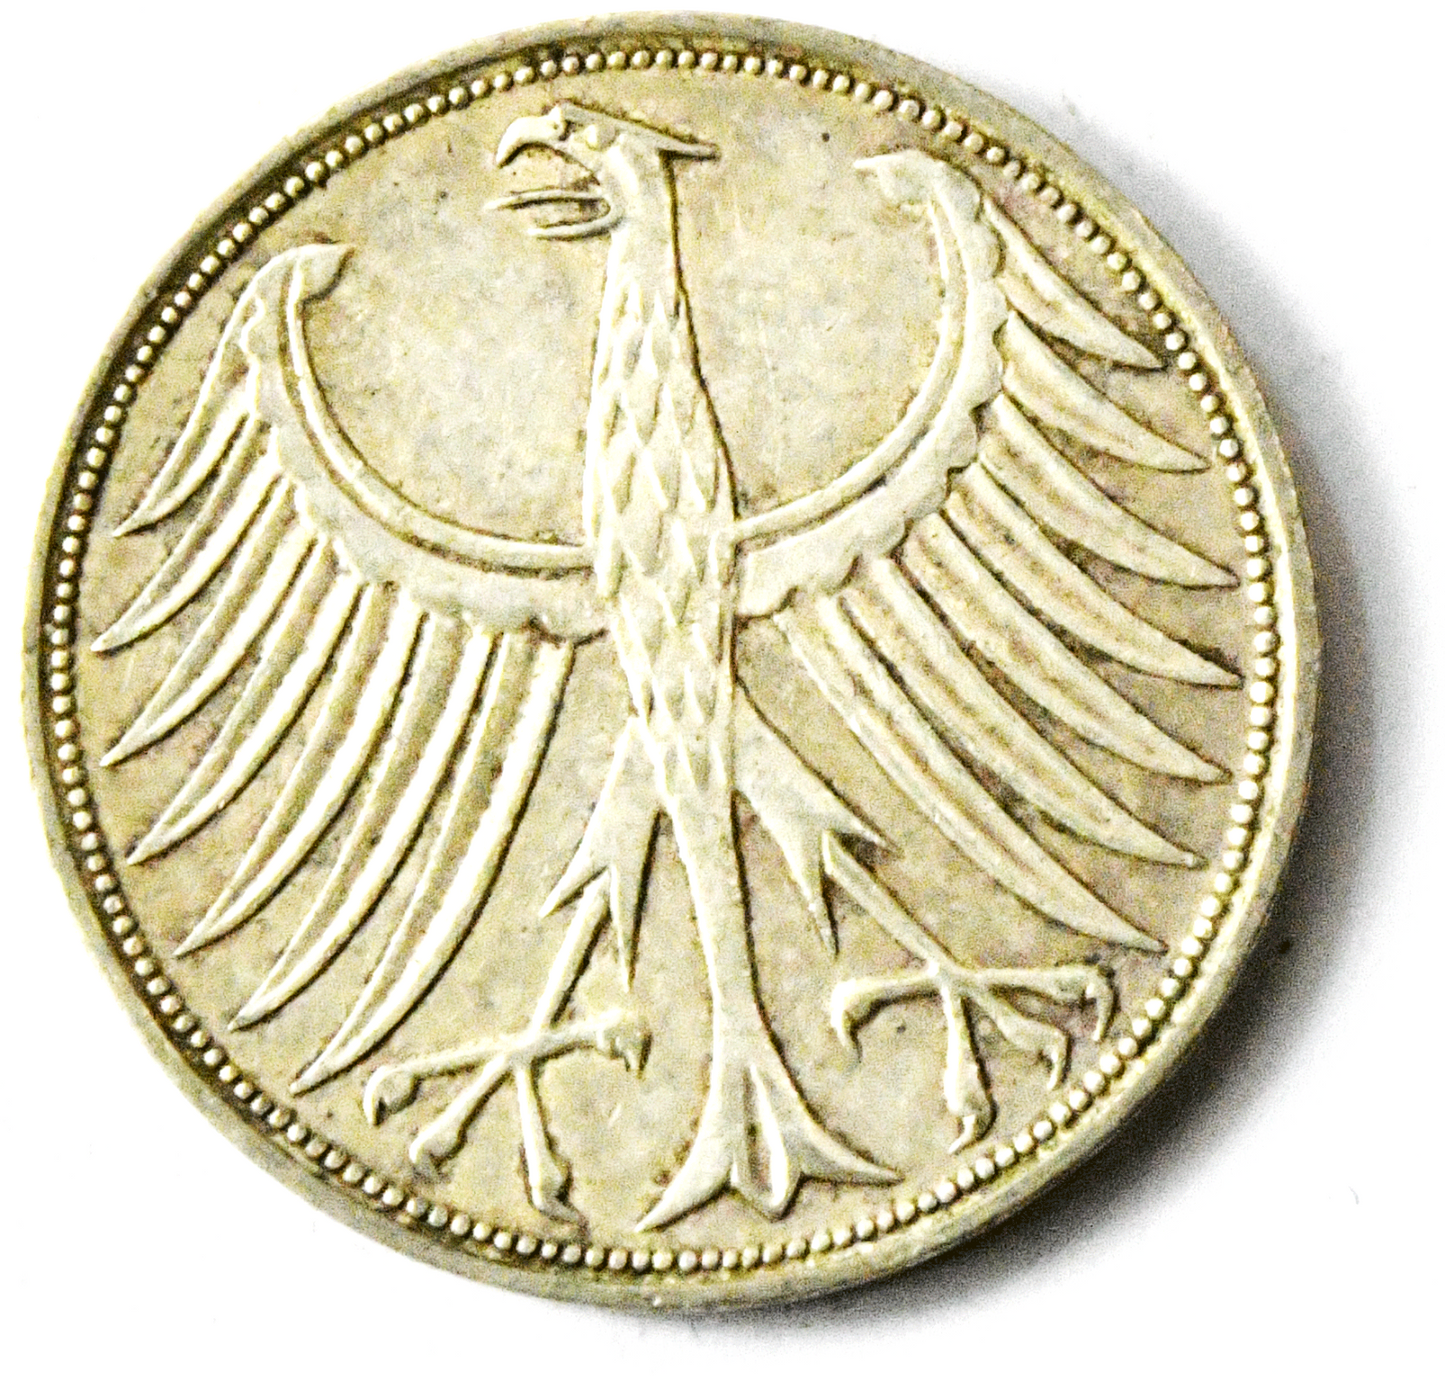 1965 G Germany Federal Republic 5 Five Mark Silver Coin KM# 112.1